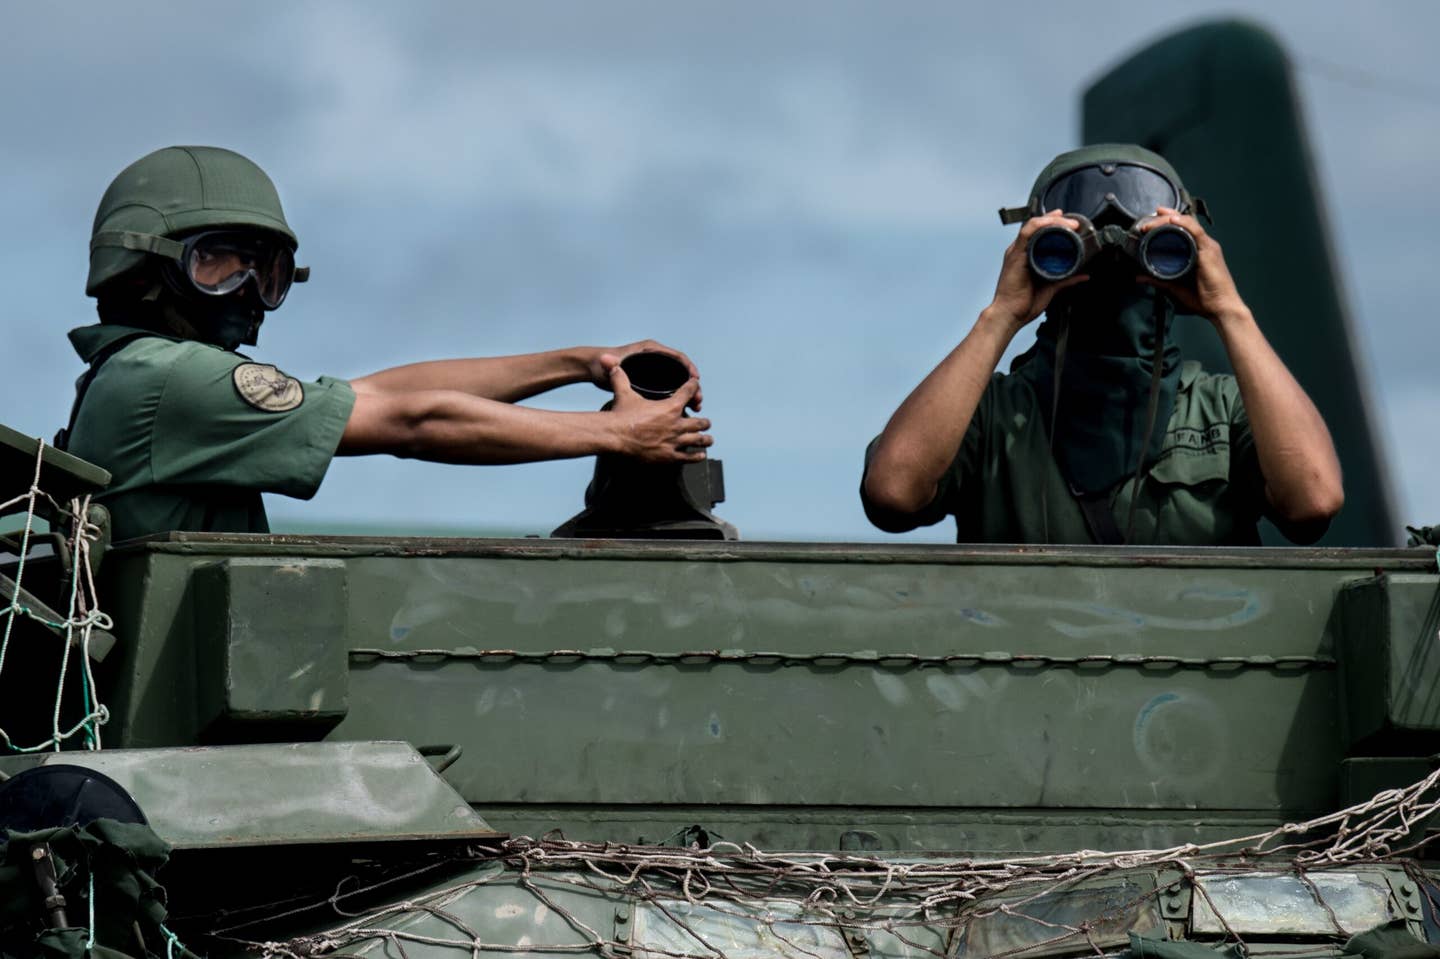 Members of the Venezuelan Army take part in a military parade in Tumeremo, Bolivar State, in Venezuela, about 56 miles from the border with Guyana, on July 21, 2015. <em>FEDERICO PARRA/AFP via Getty Images</em>